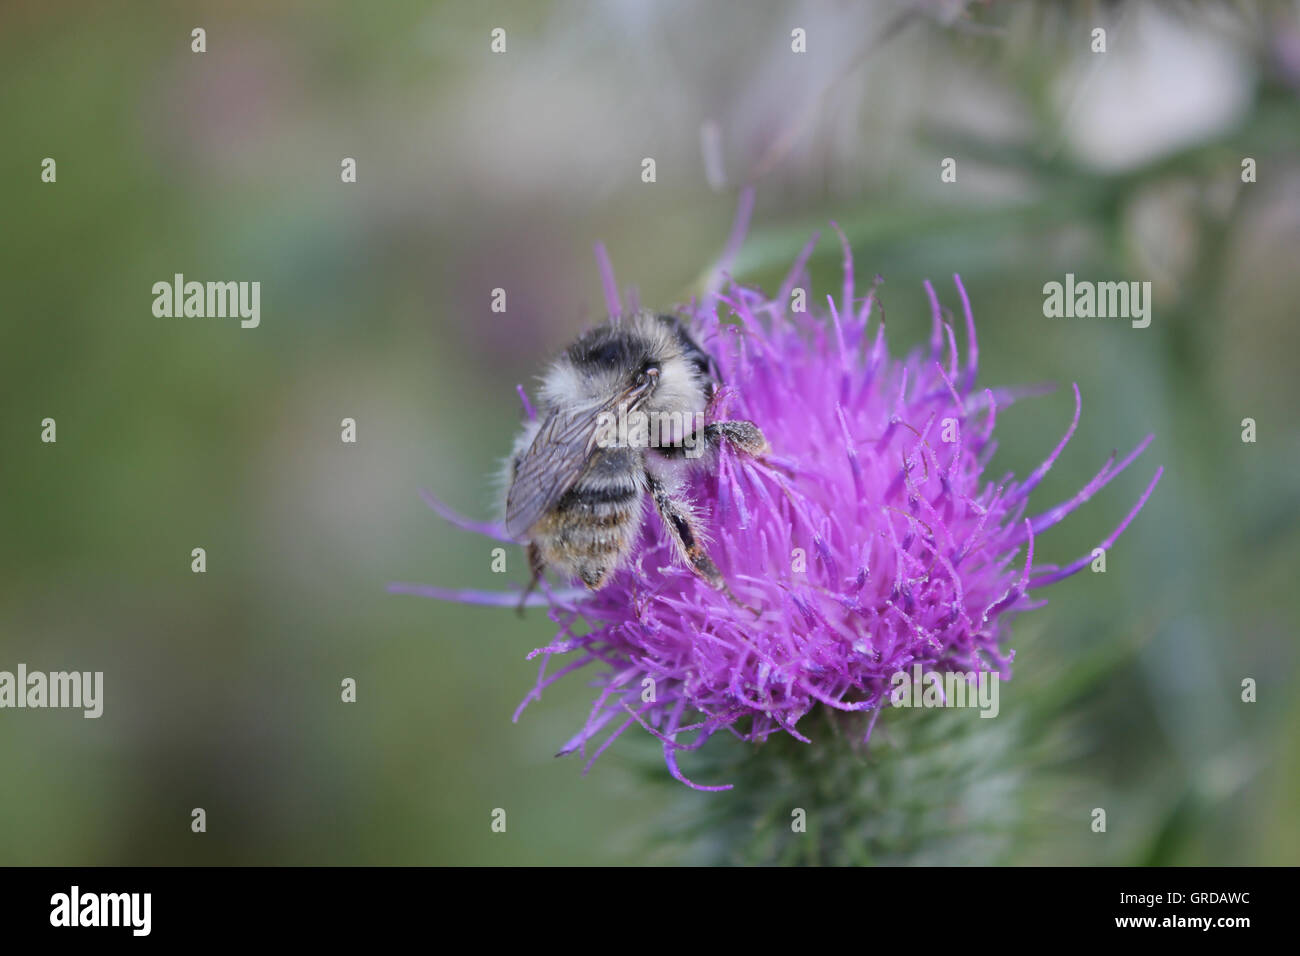 Bee Nibbling Nectar From Flowering Thistle Stock Photo